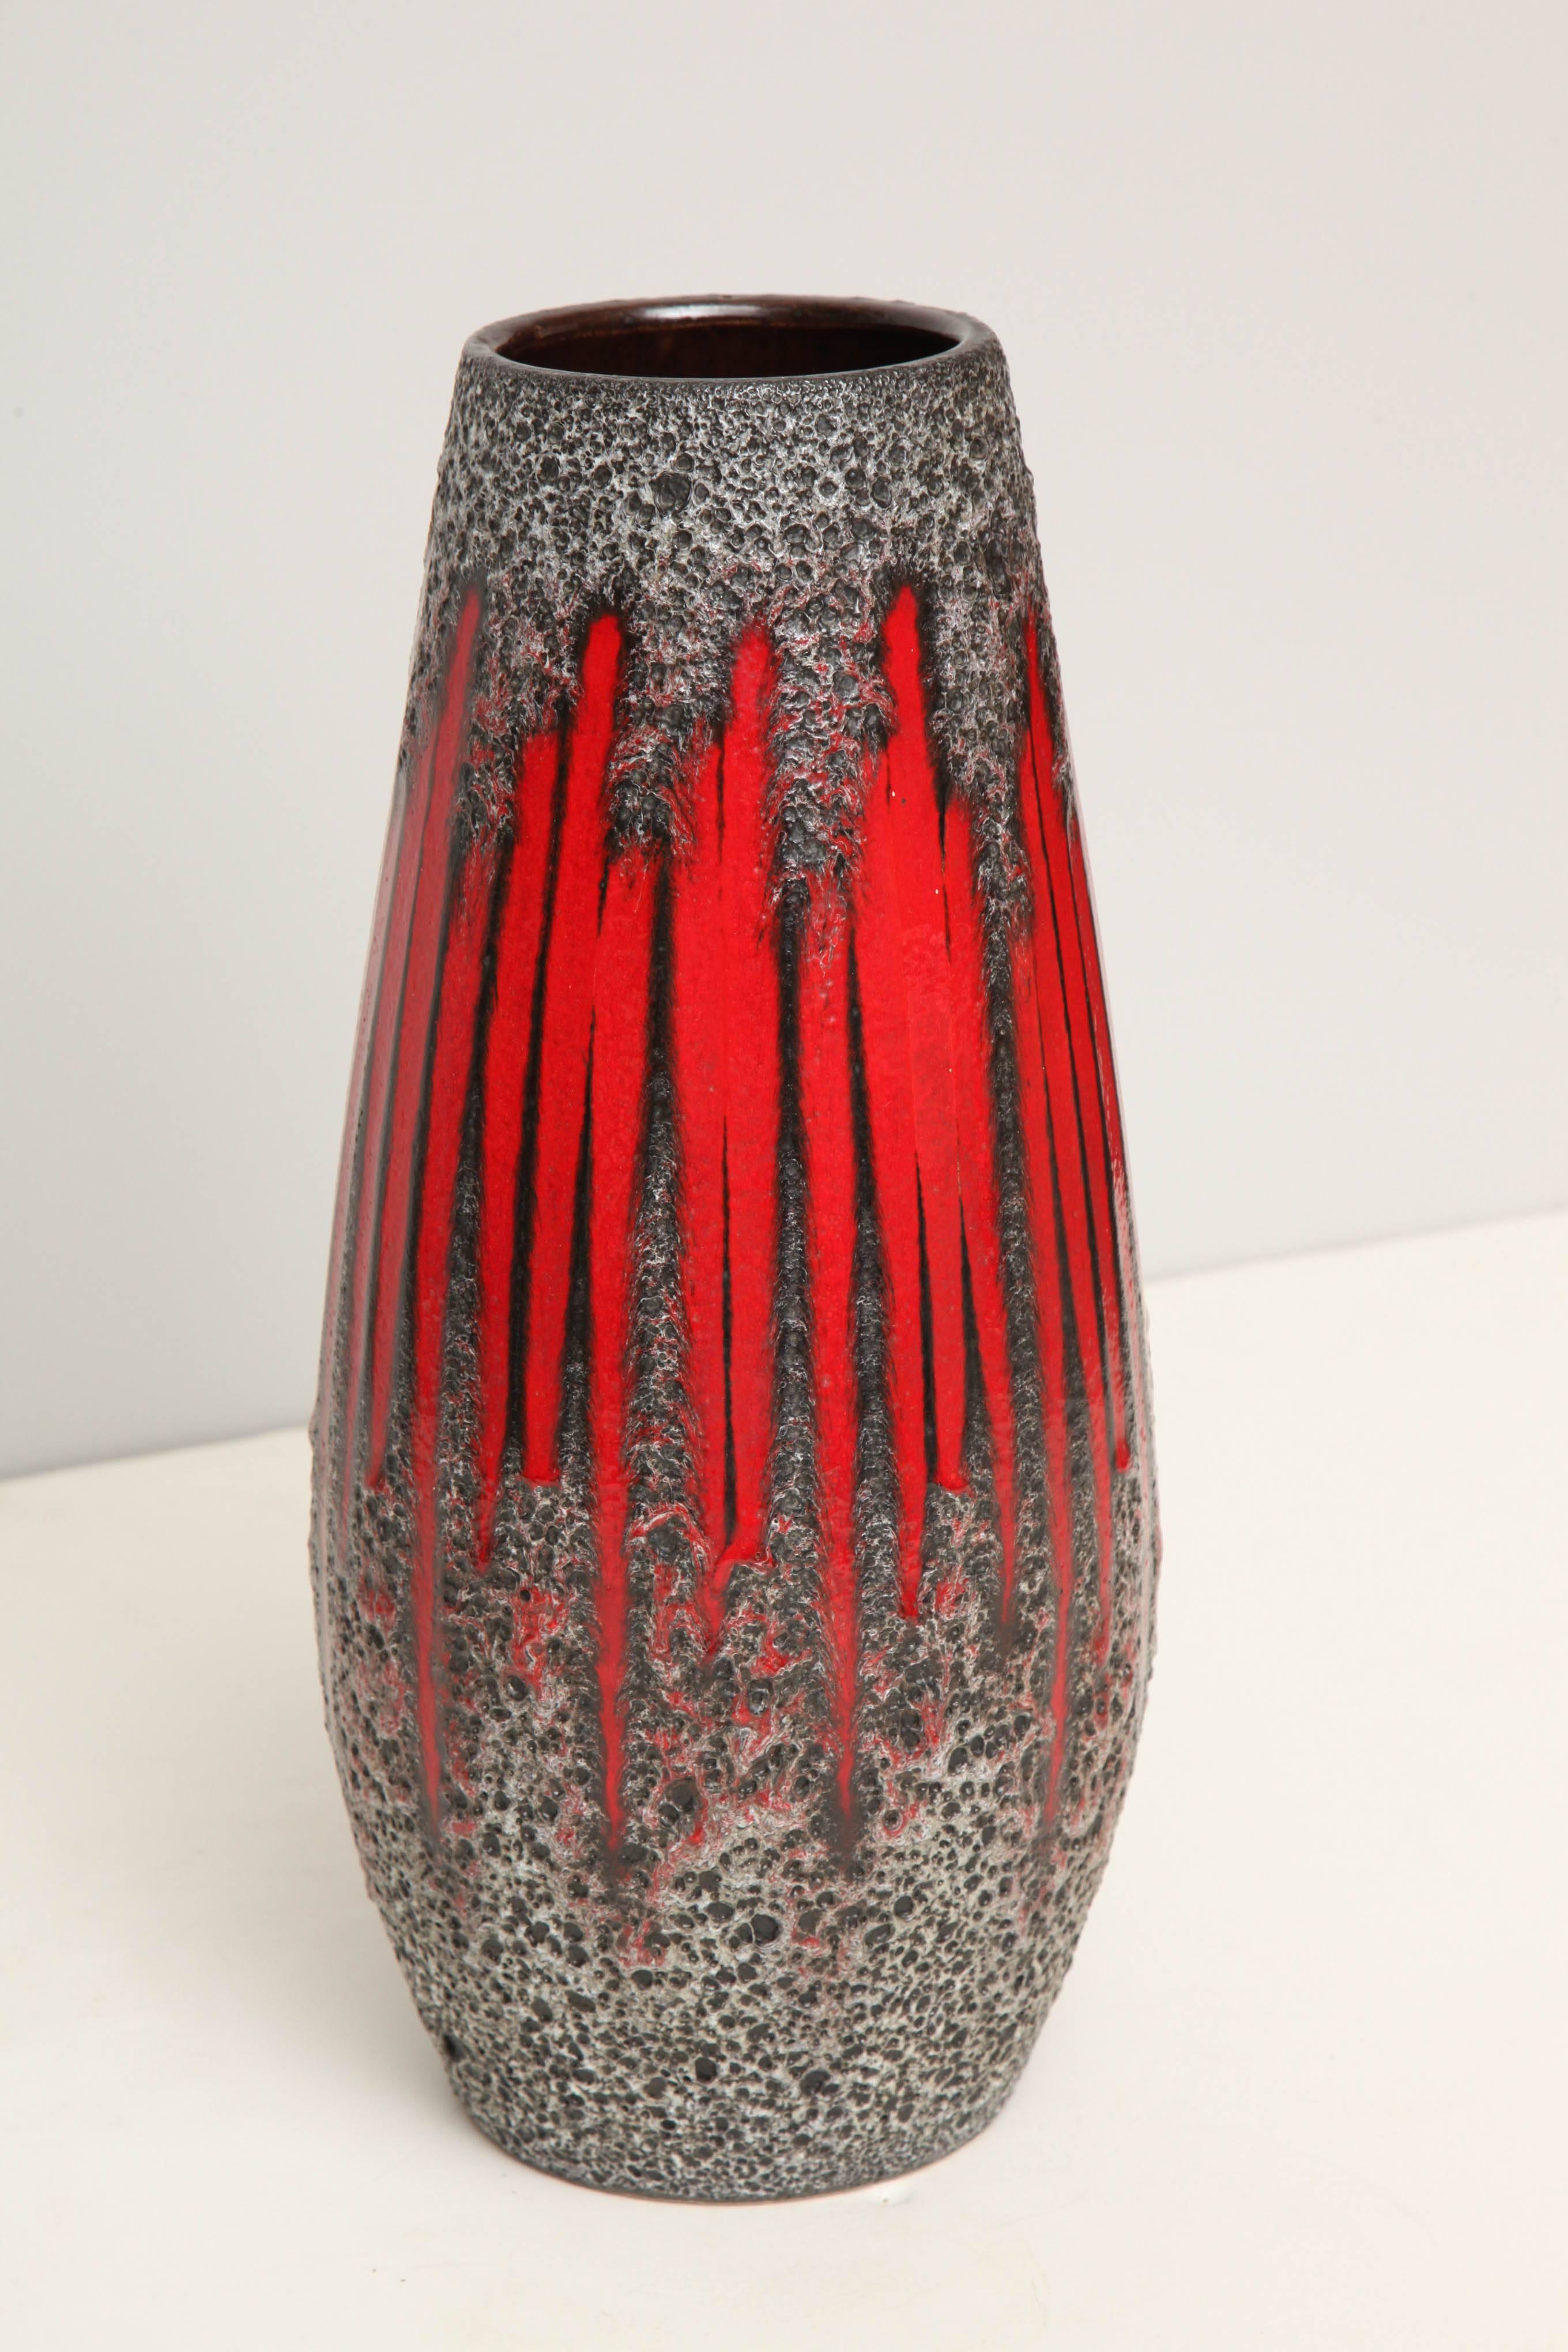 An art pottery vase made by Scheurich Keramik in West Germany.